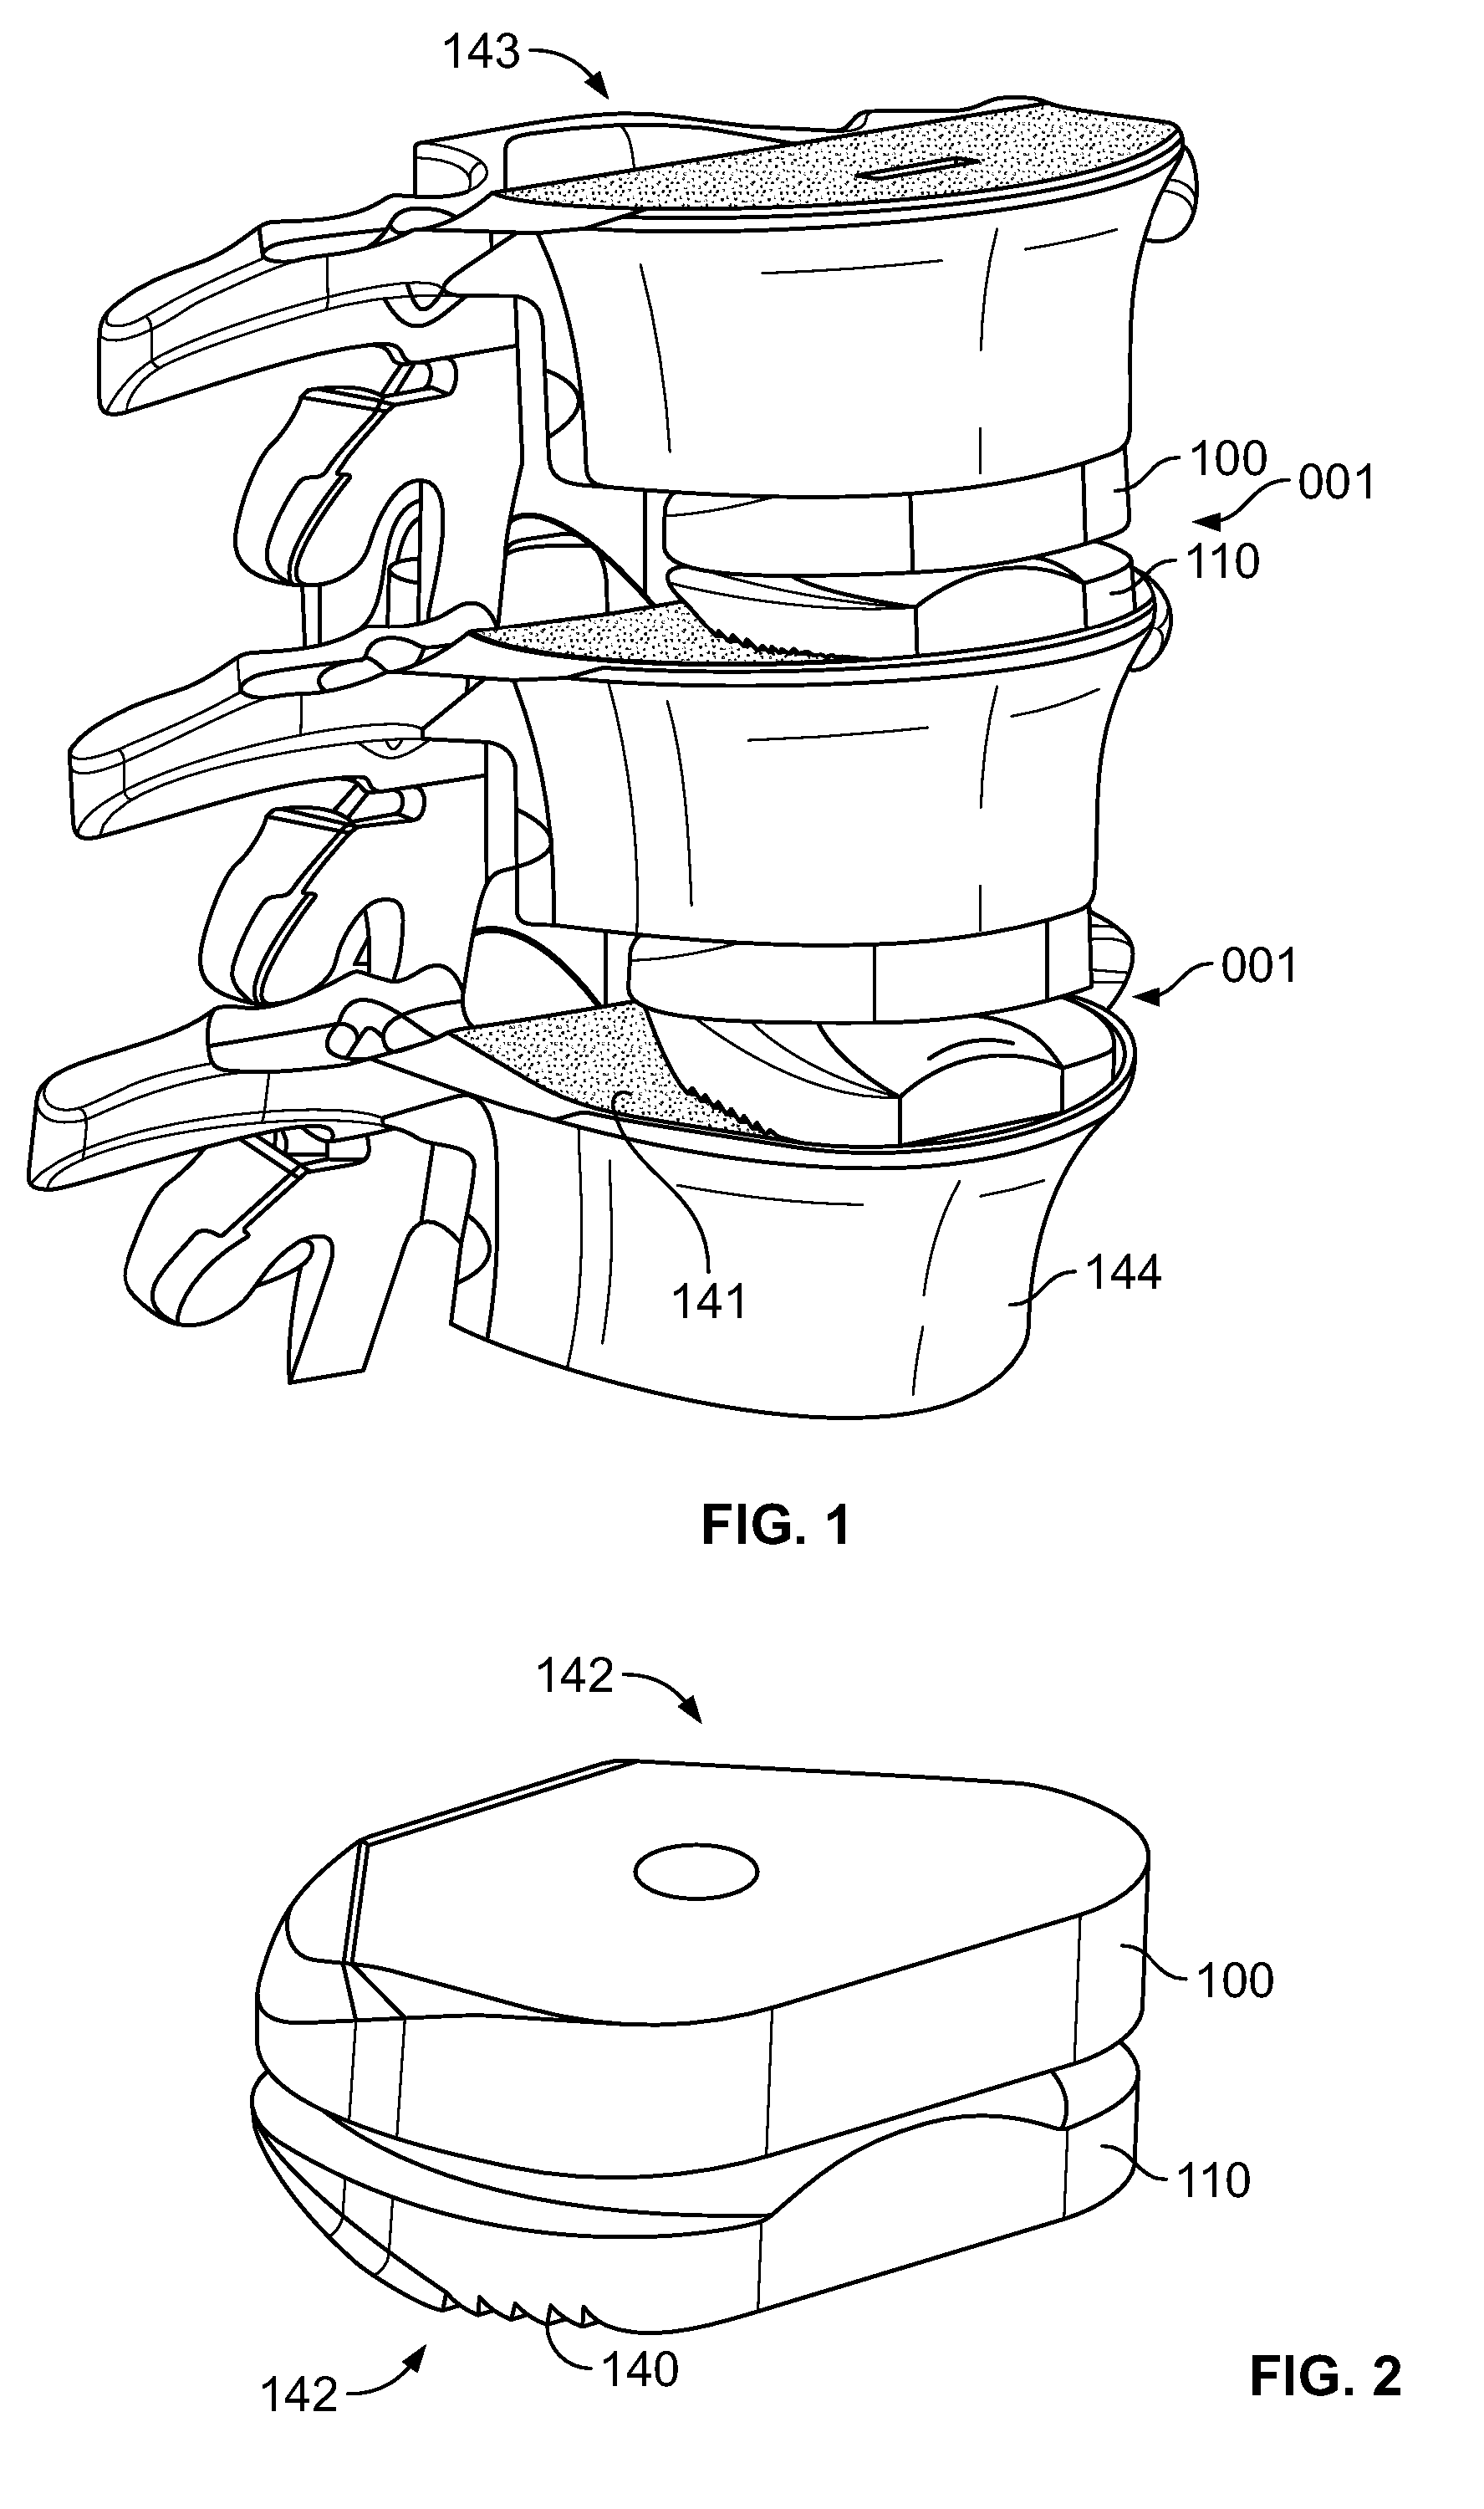 Systems and methods for sizing, inserting and securing an implant in intervertebral space